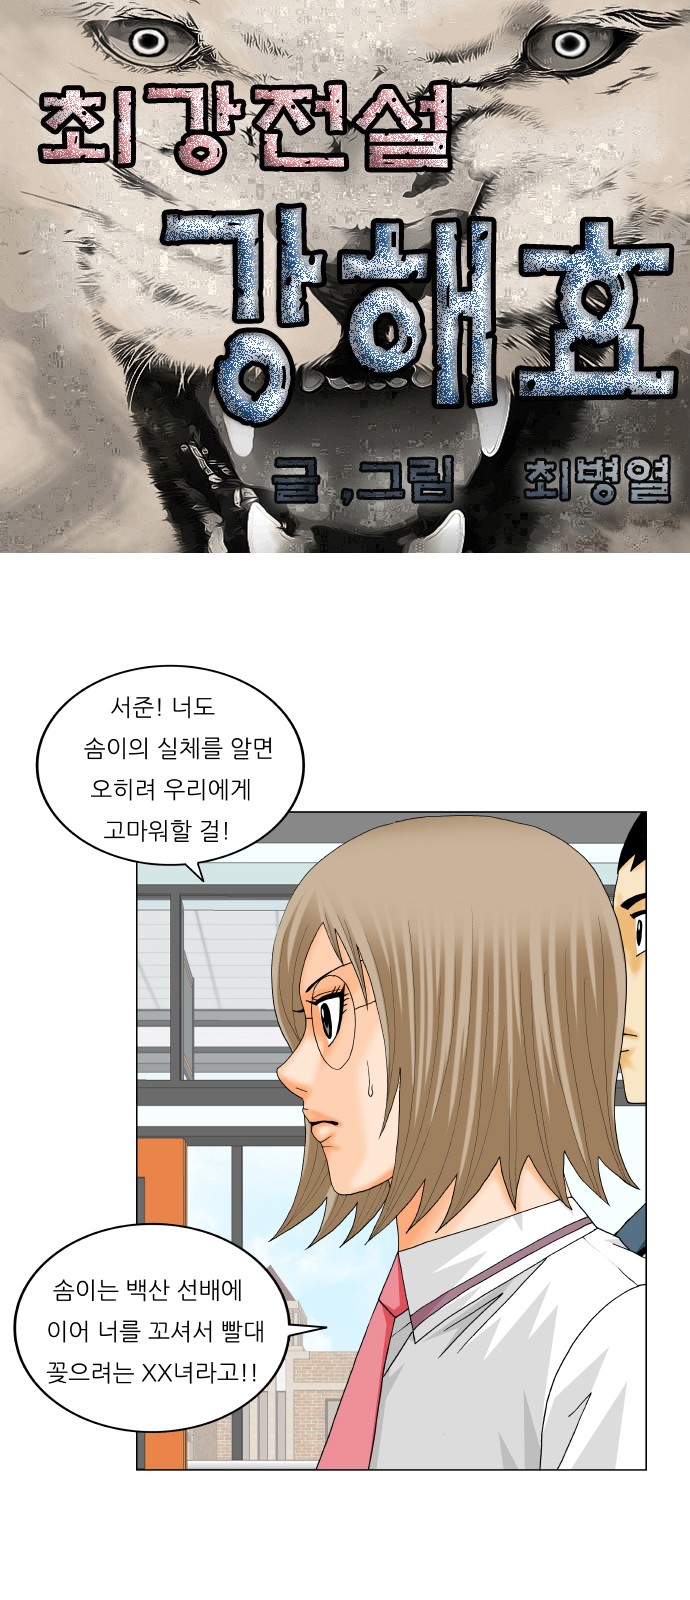 Ultimate Legend - Kang Hae Hyo - Chapter 237 - Page 1